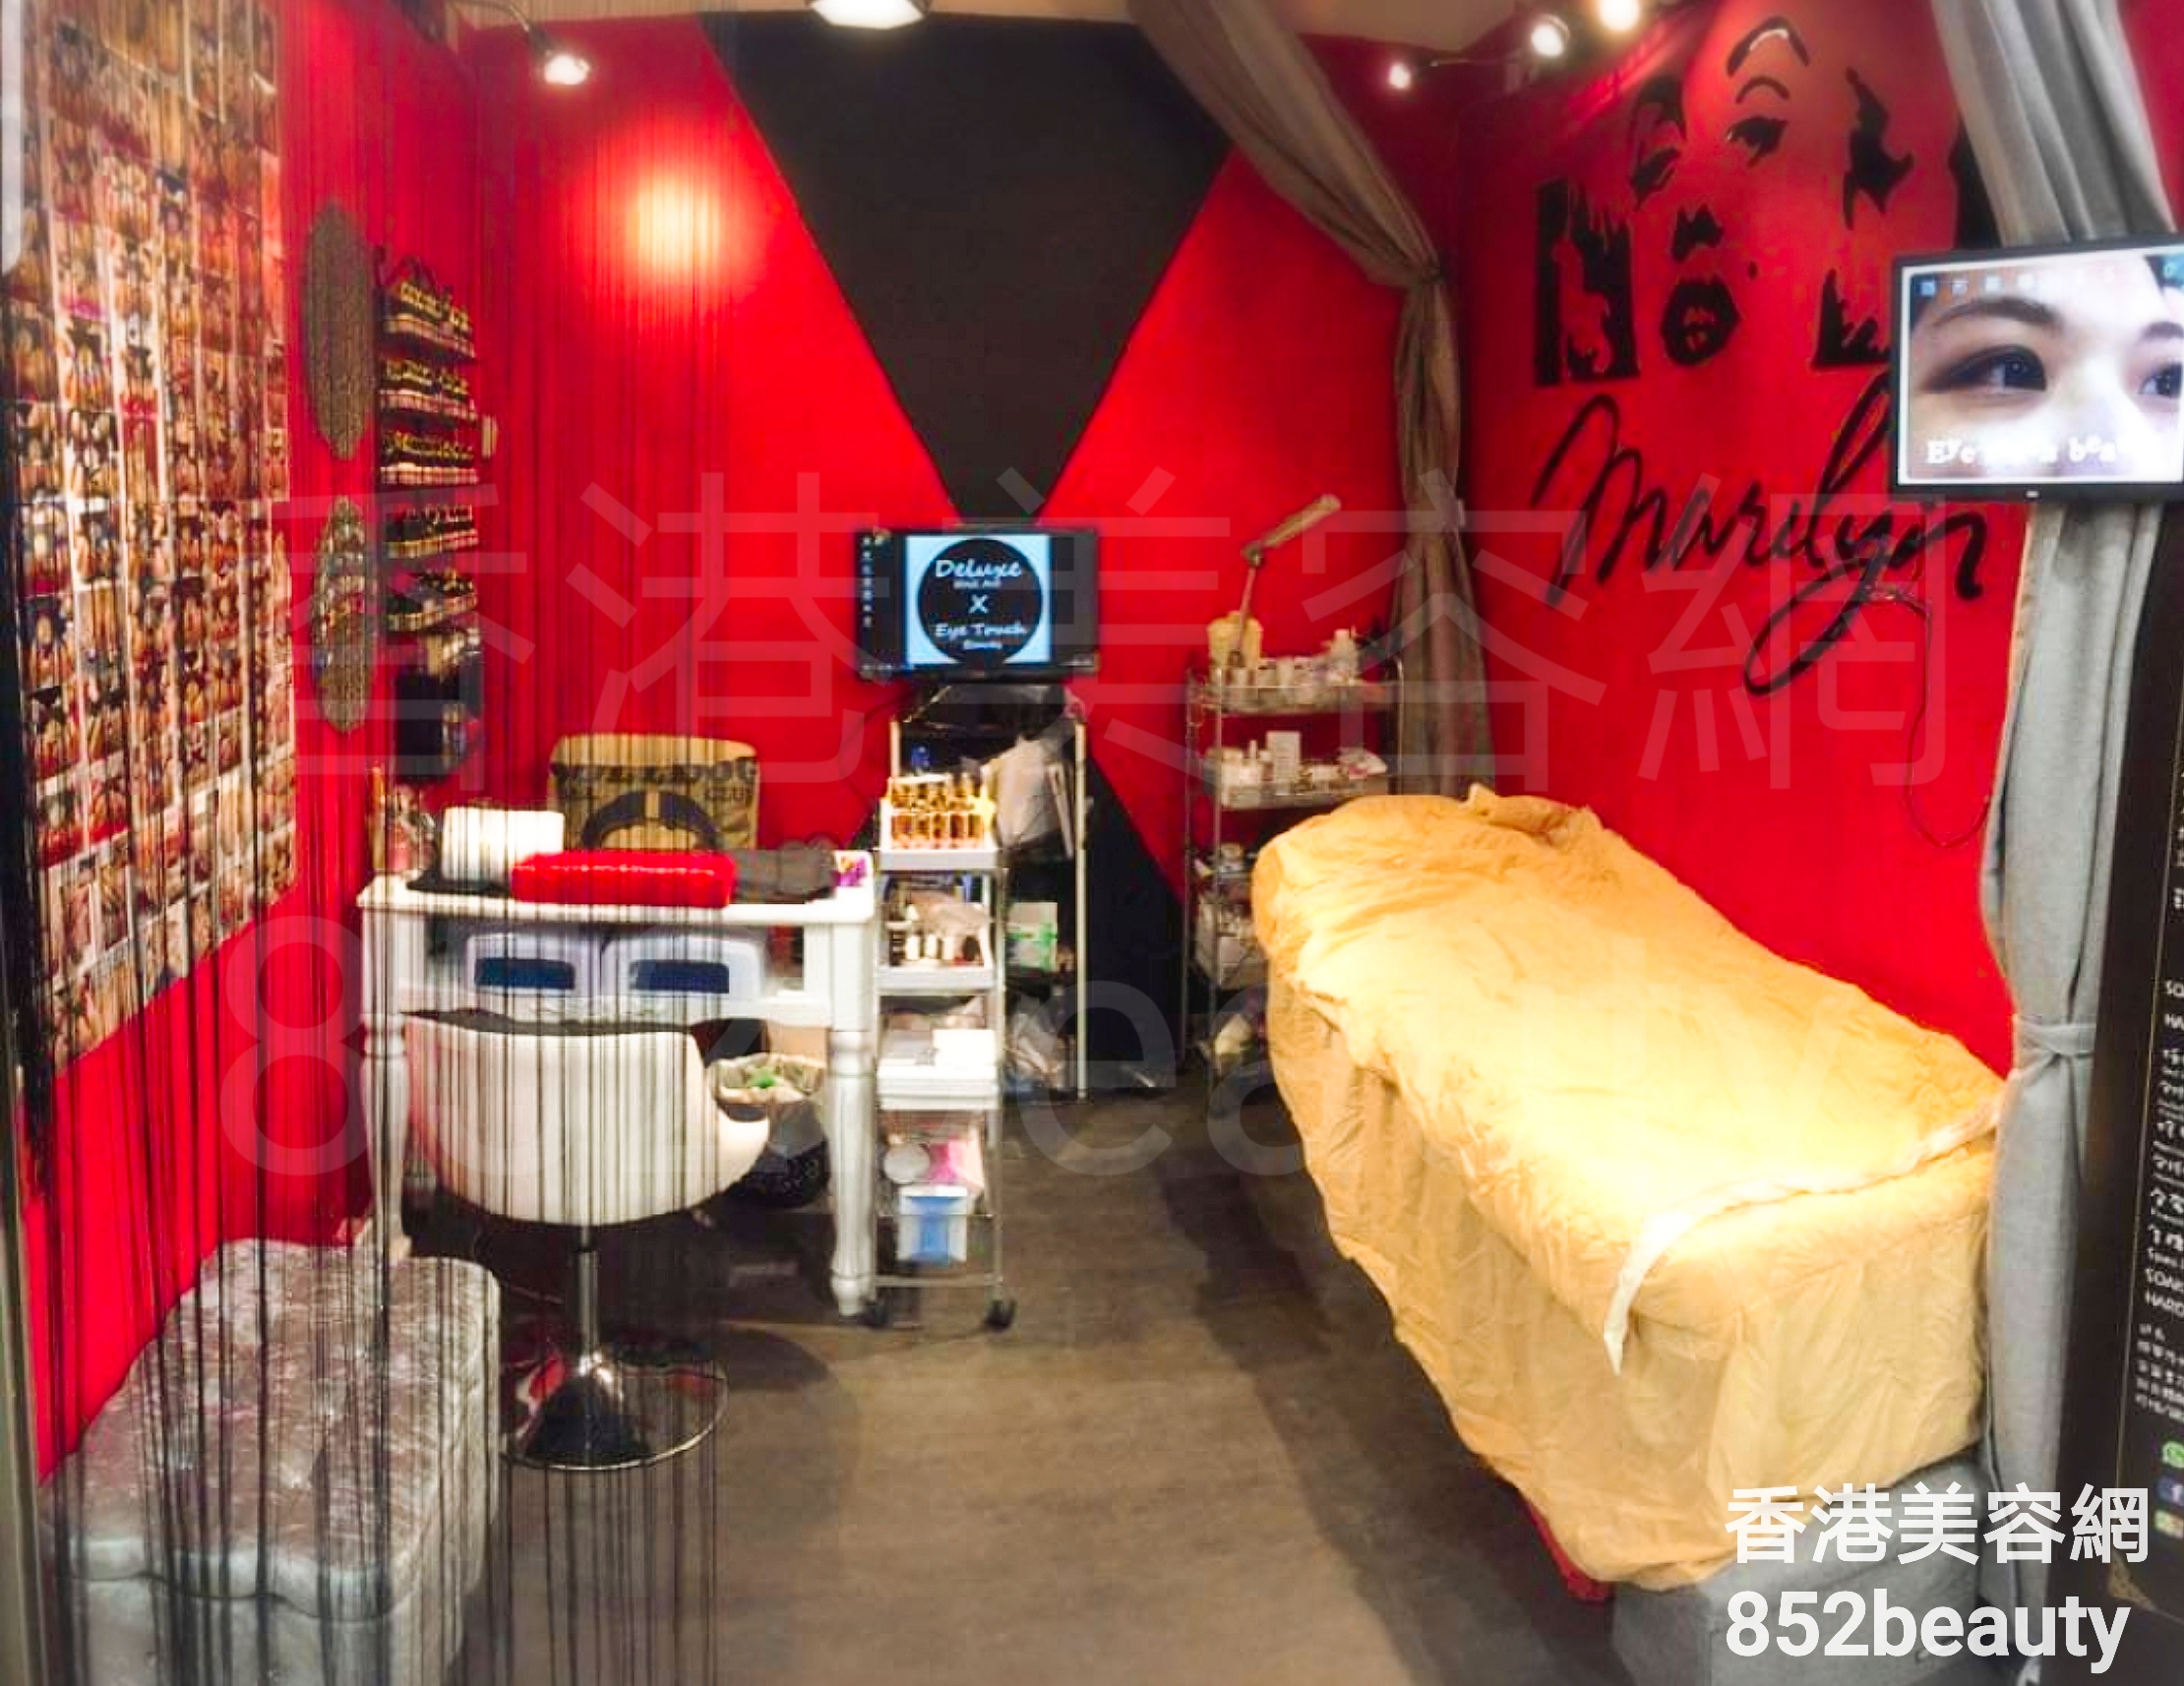 Beauty Salon / Beautician good rated Deluxe Nail Art @ Hong Kong Beauty Salon Hong Kong Beauty Salon